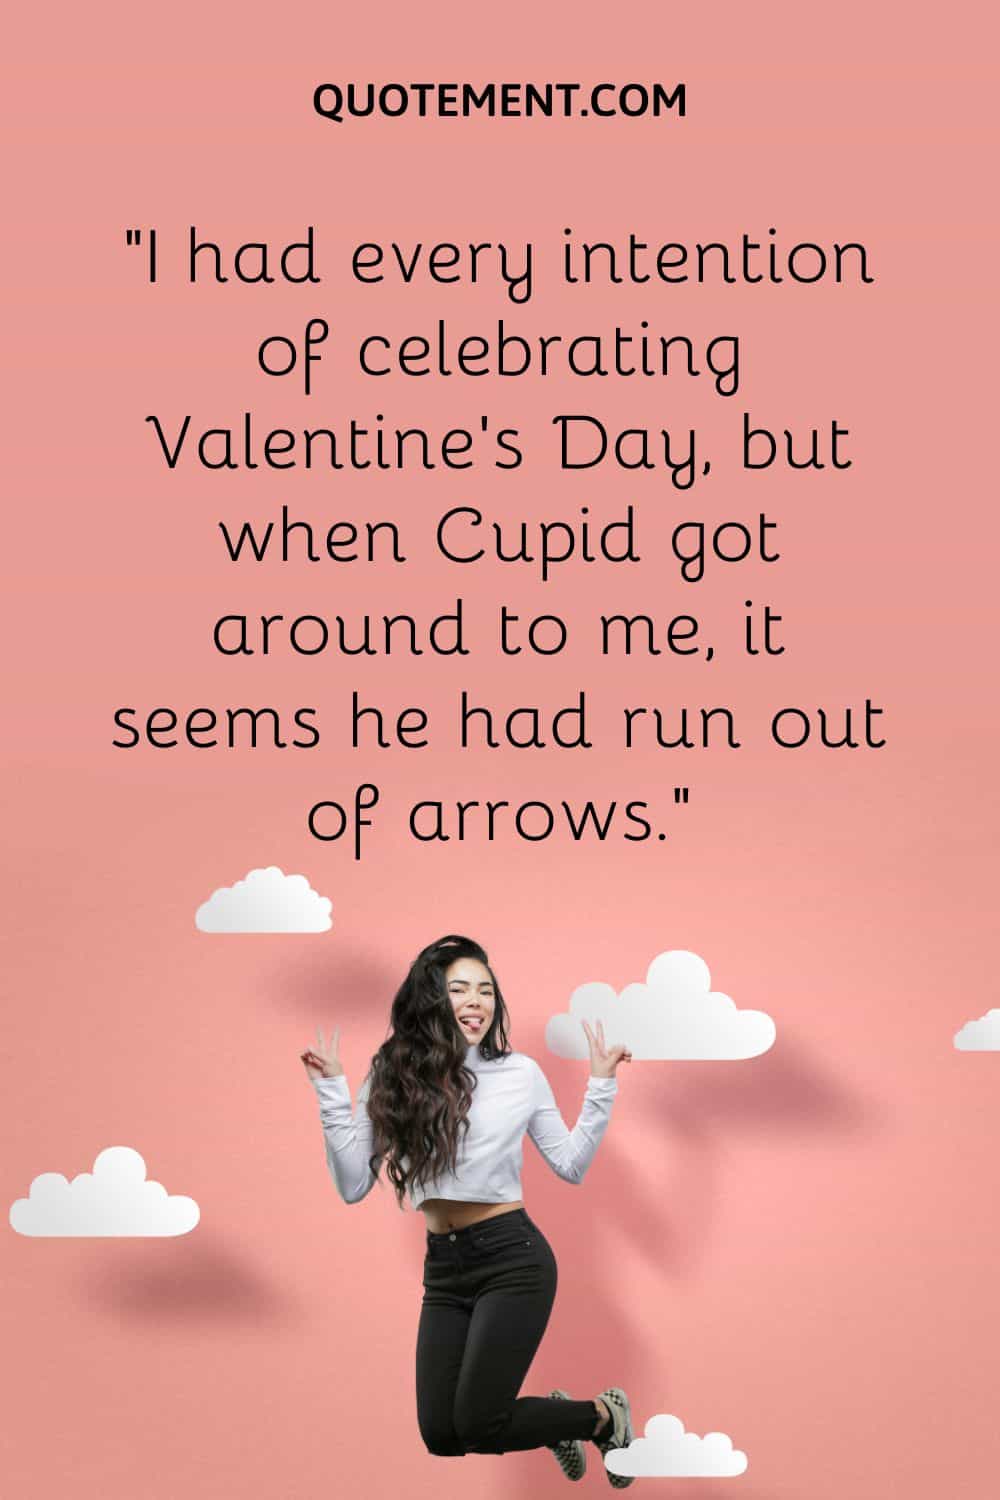 I had every intention of celebrating Valentine’s Day, but when Cupid got around to me, it seems he had run out of arrows